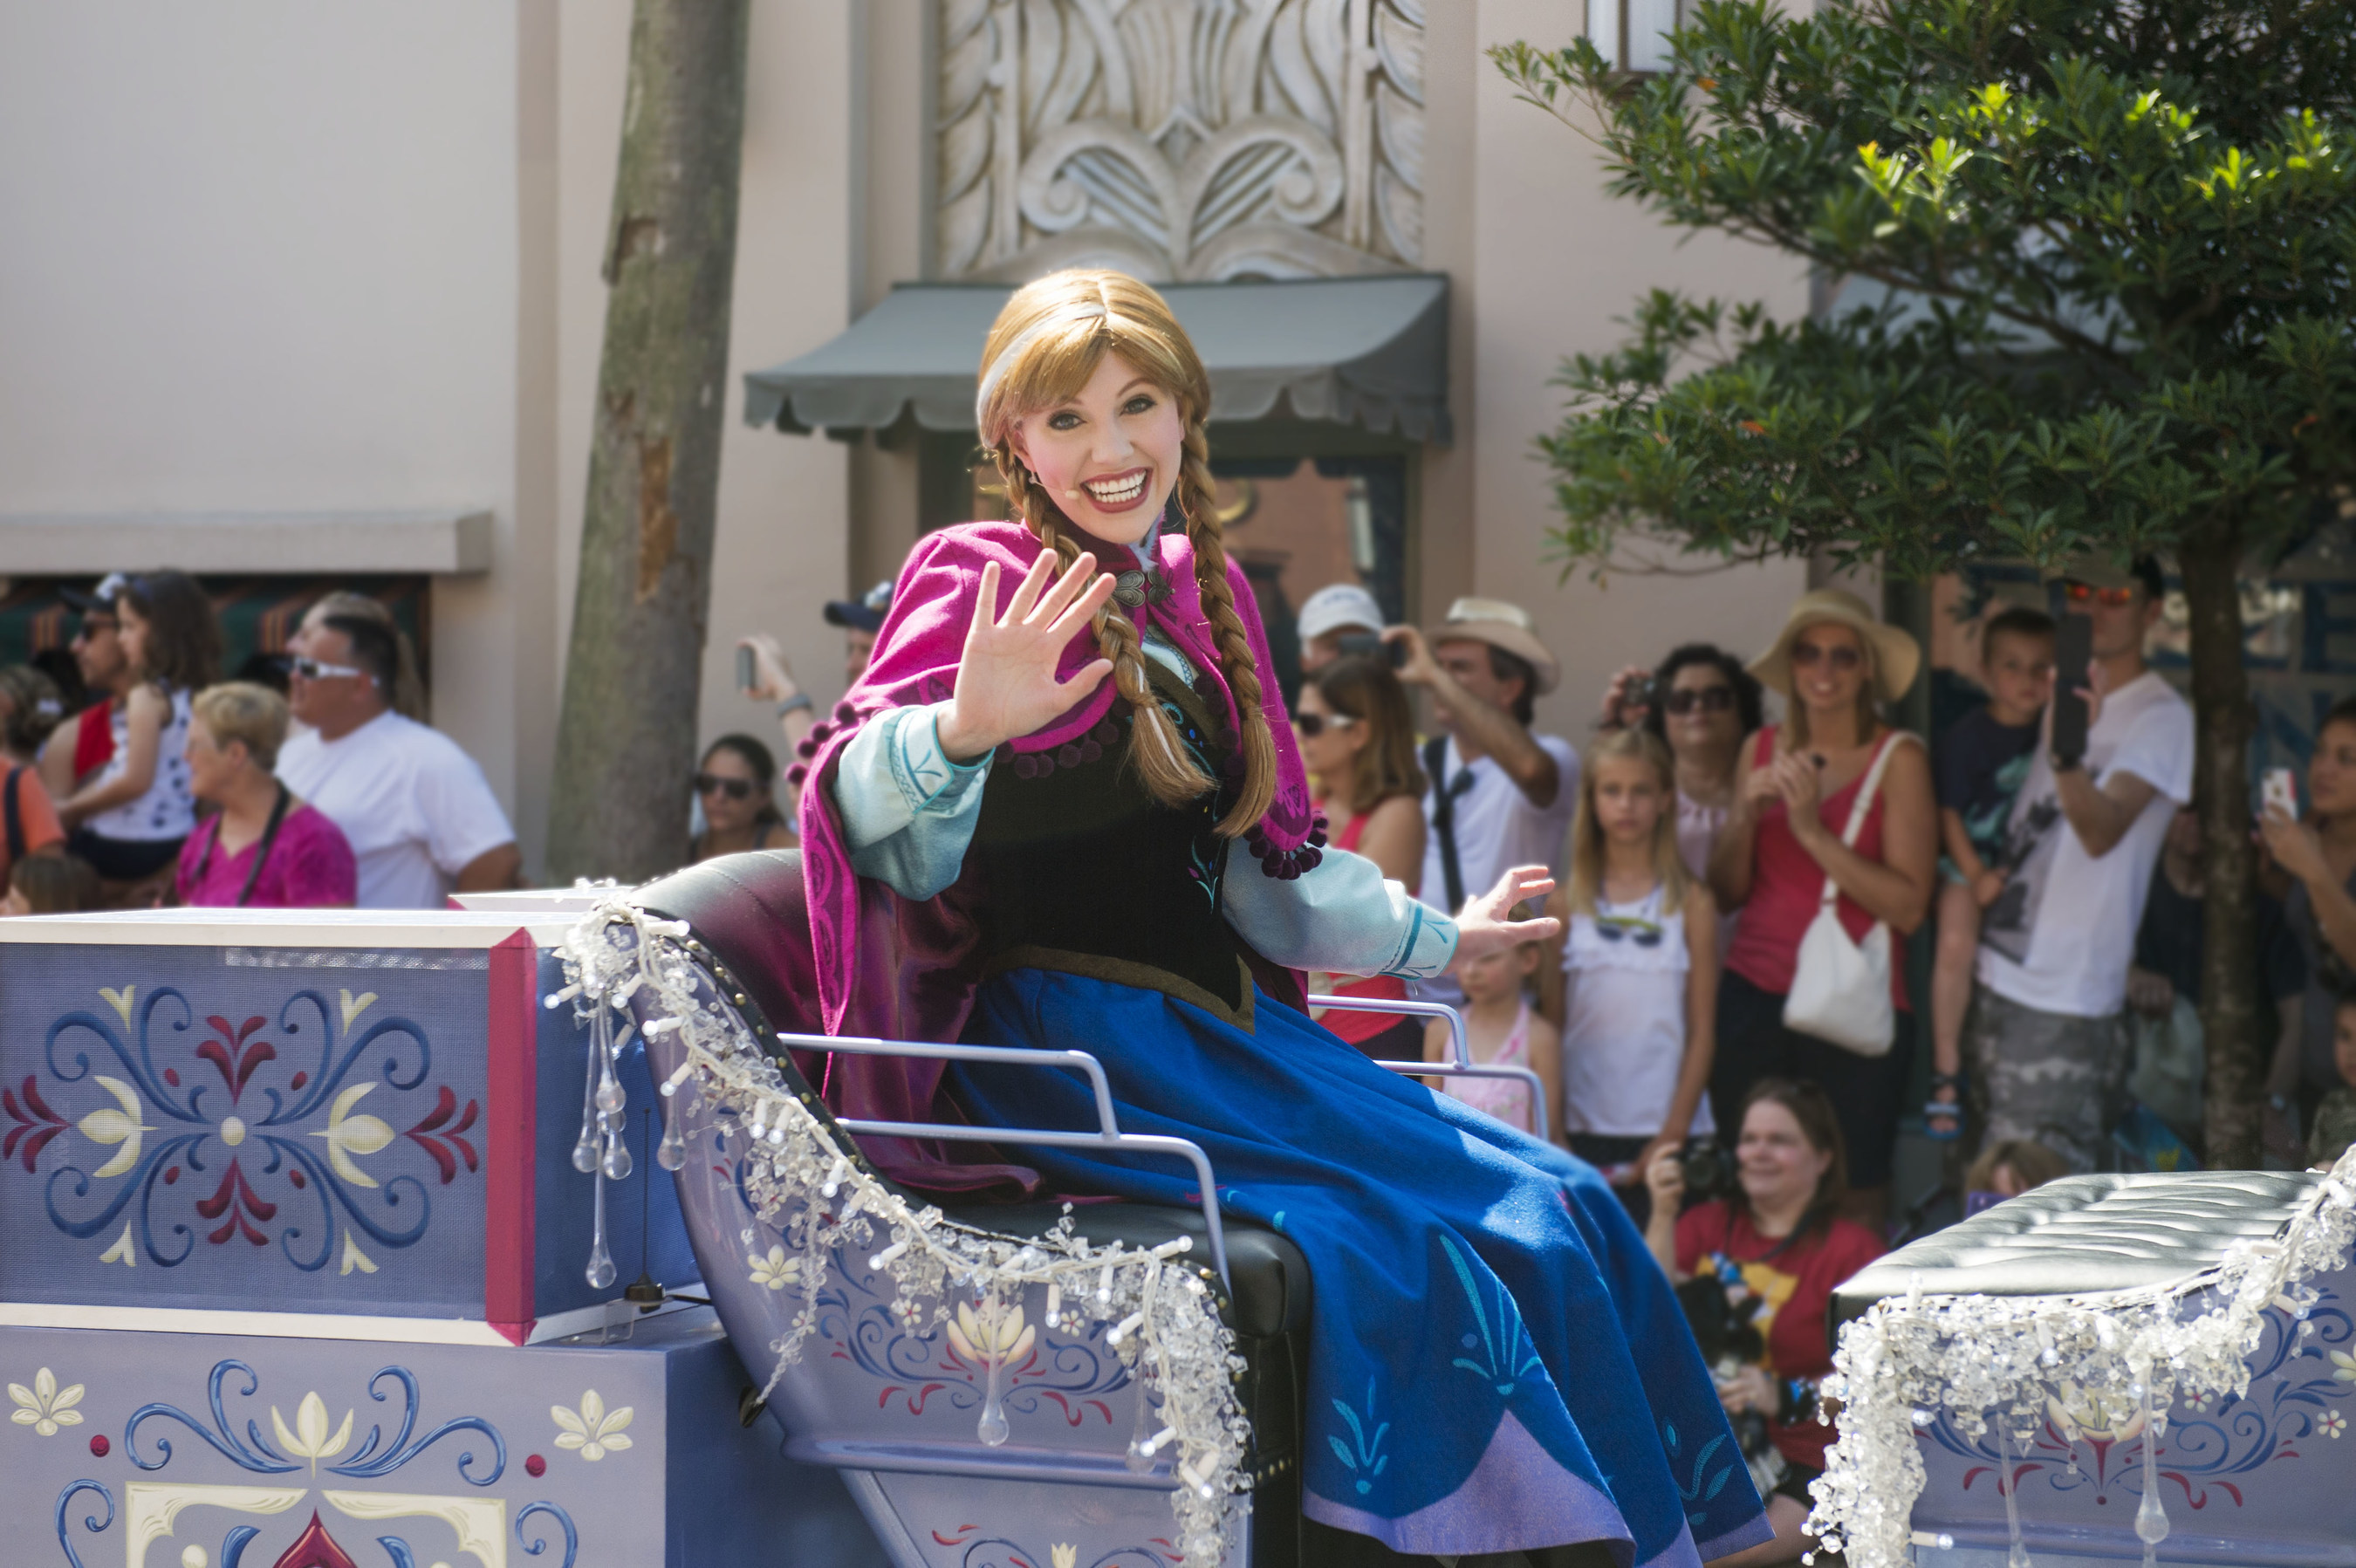 Twice each day, from June 17 through Sept. 7, Anna, Elsa and Kristoff from Disney's "Frozen" take part in a festive cavalcade throughout Hollywoodland, accompanied by the Royal Arendelle Flag Corps and a flurry of skaters, skiers and ice cutters, along with lovable snowman, Olaf. It's all part of "Frozen" Summer Fun, now at Disney's Hollywood Studios, one of four theme parks at Walt Disney World Resort in Lake Buena Vista, Fla. (Chloe Rice, photographer)